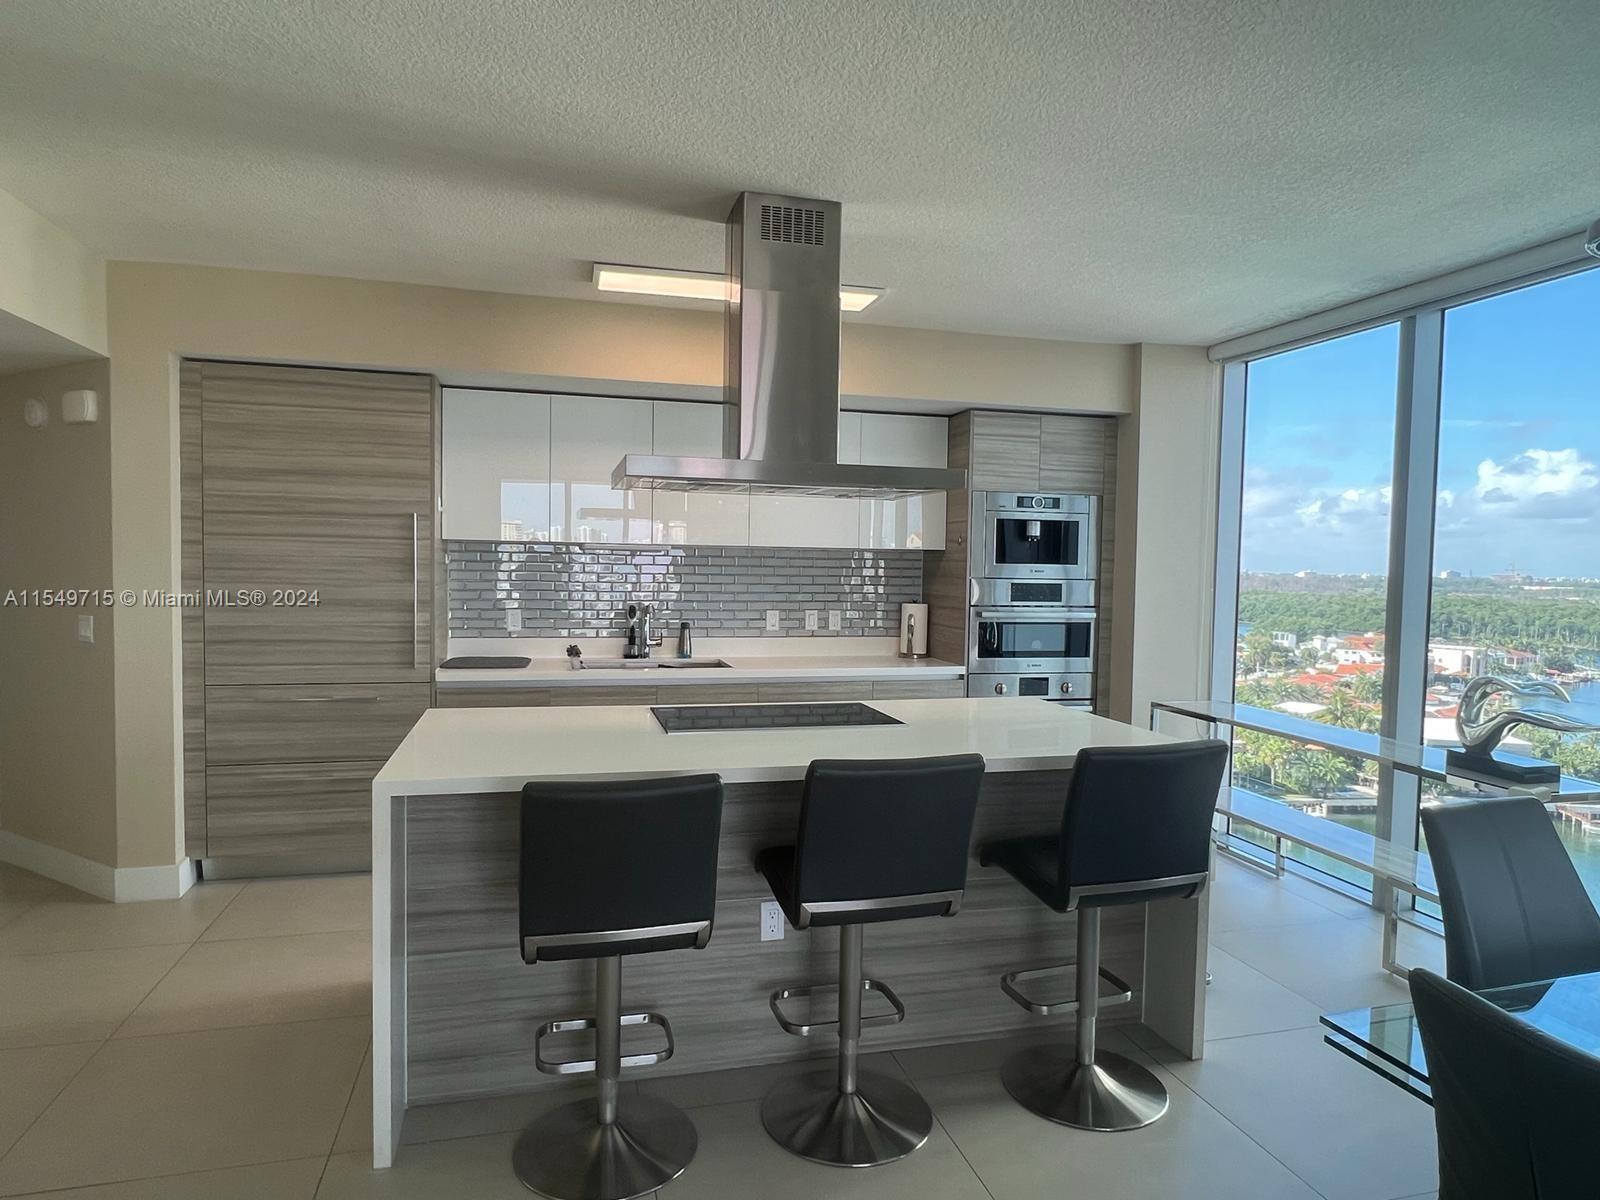 Available from March 13/2024 to June 12/2024 Spectacular fully furnished 3-bed/3.5-bath apartment in Parque Towers. Open concept European kitchen, high impact windows. Amenities include pools, 24H concierge, gym, spa, and more. Steps from the beach, Aventura Mall & Bal Harbour. Fully furnished. For showing, please contact the listing agent. Also available from August 15/2024 to June 20/2025.